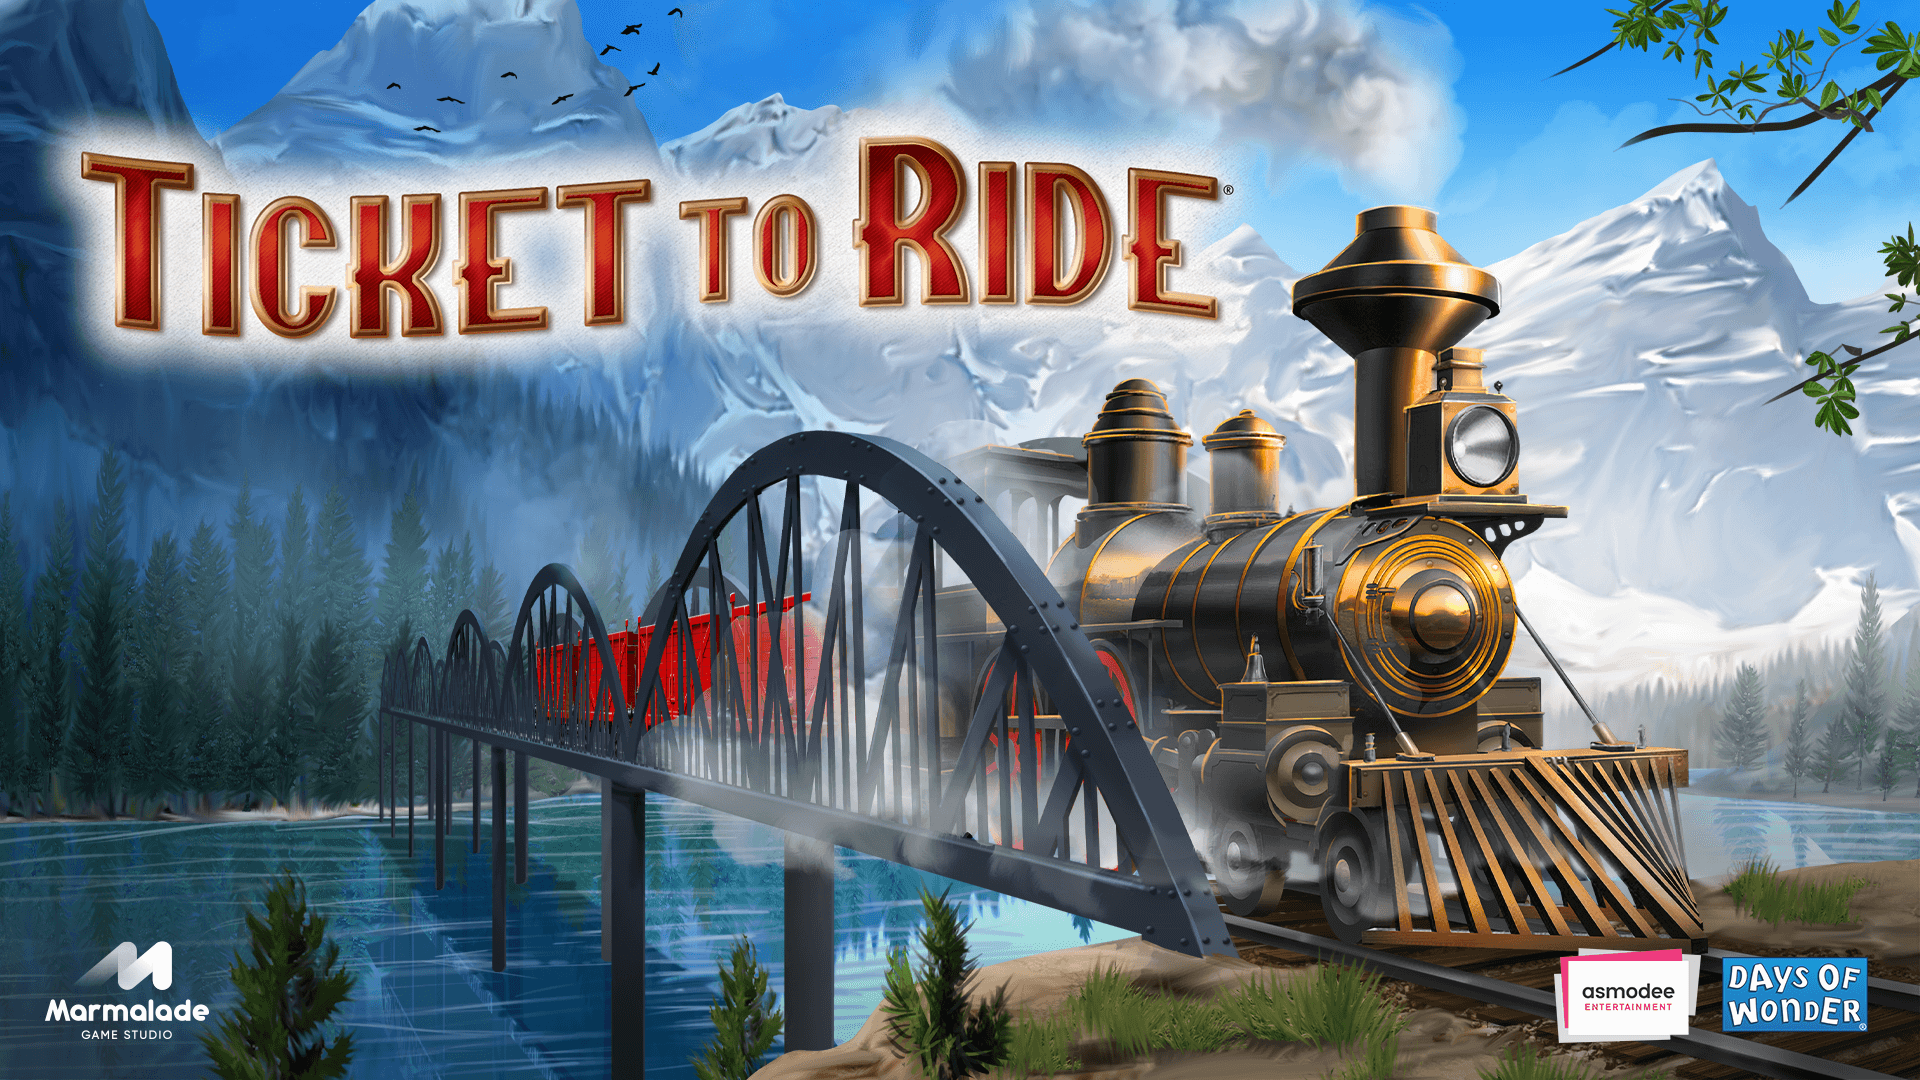 A New Ticket To Ride® Video Game is Approaching the Steam Platform!